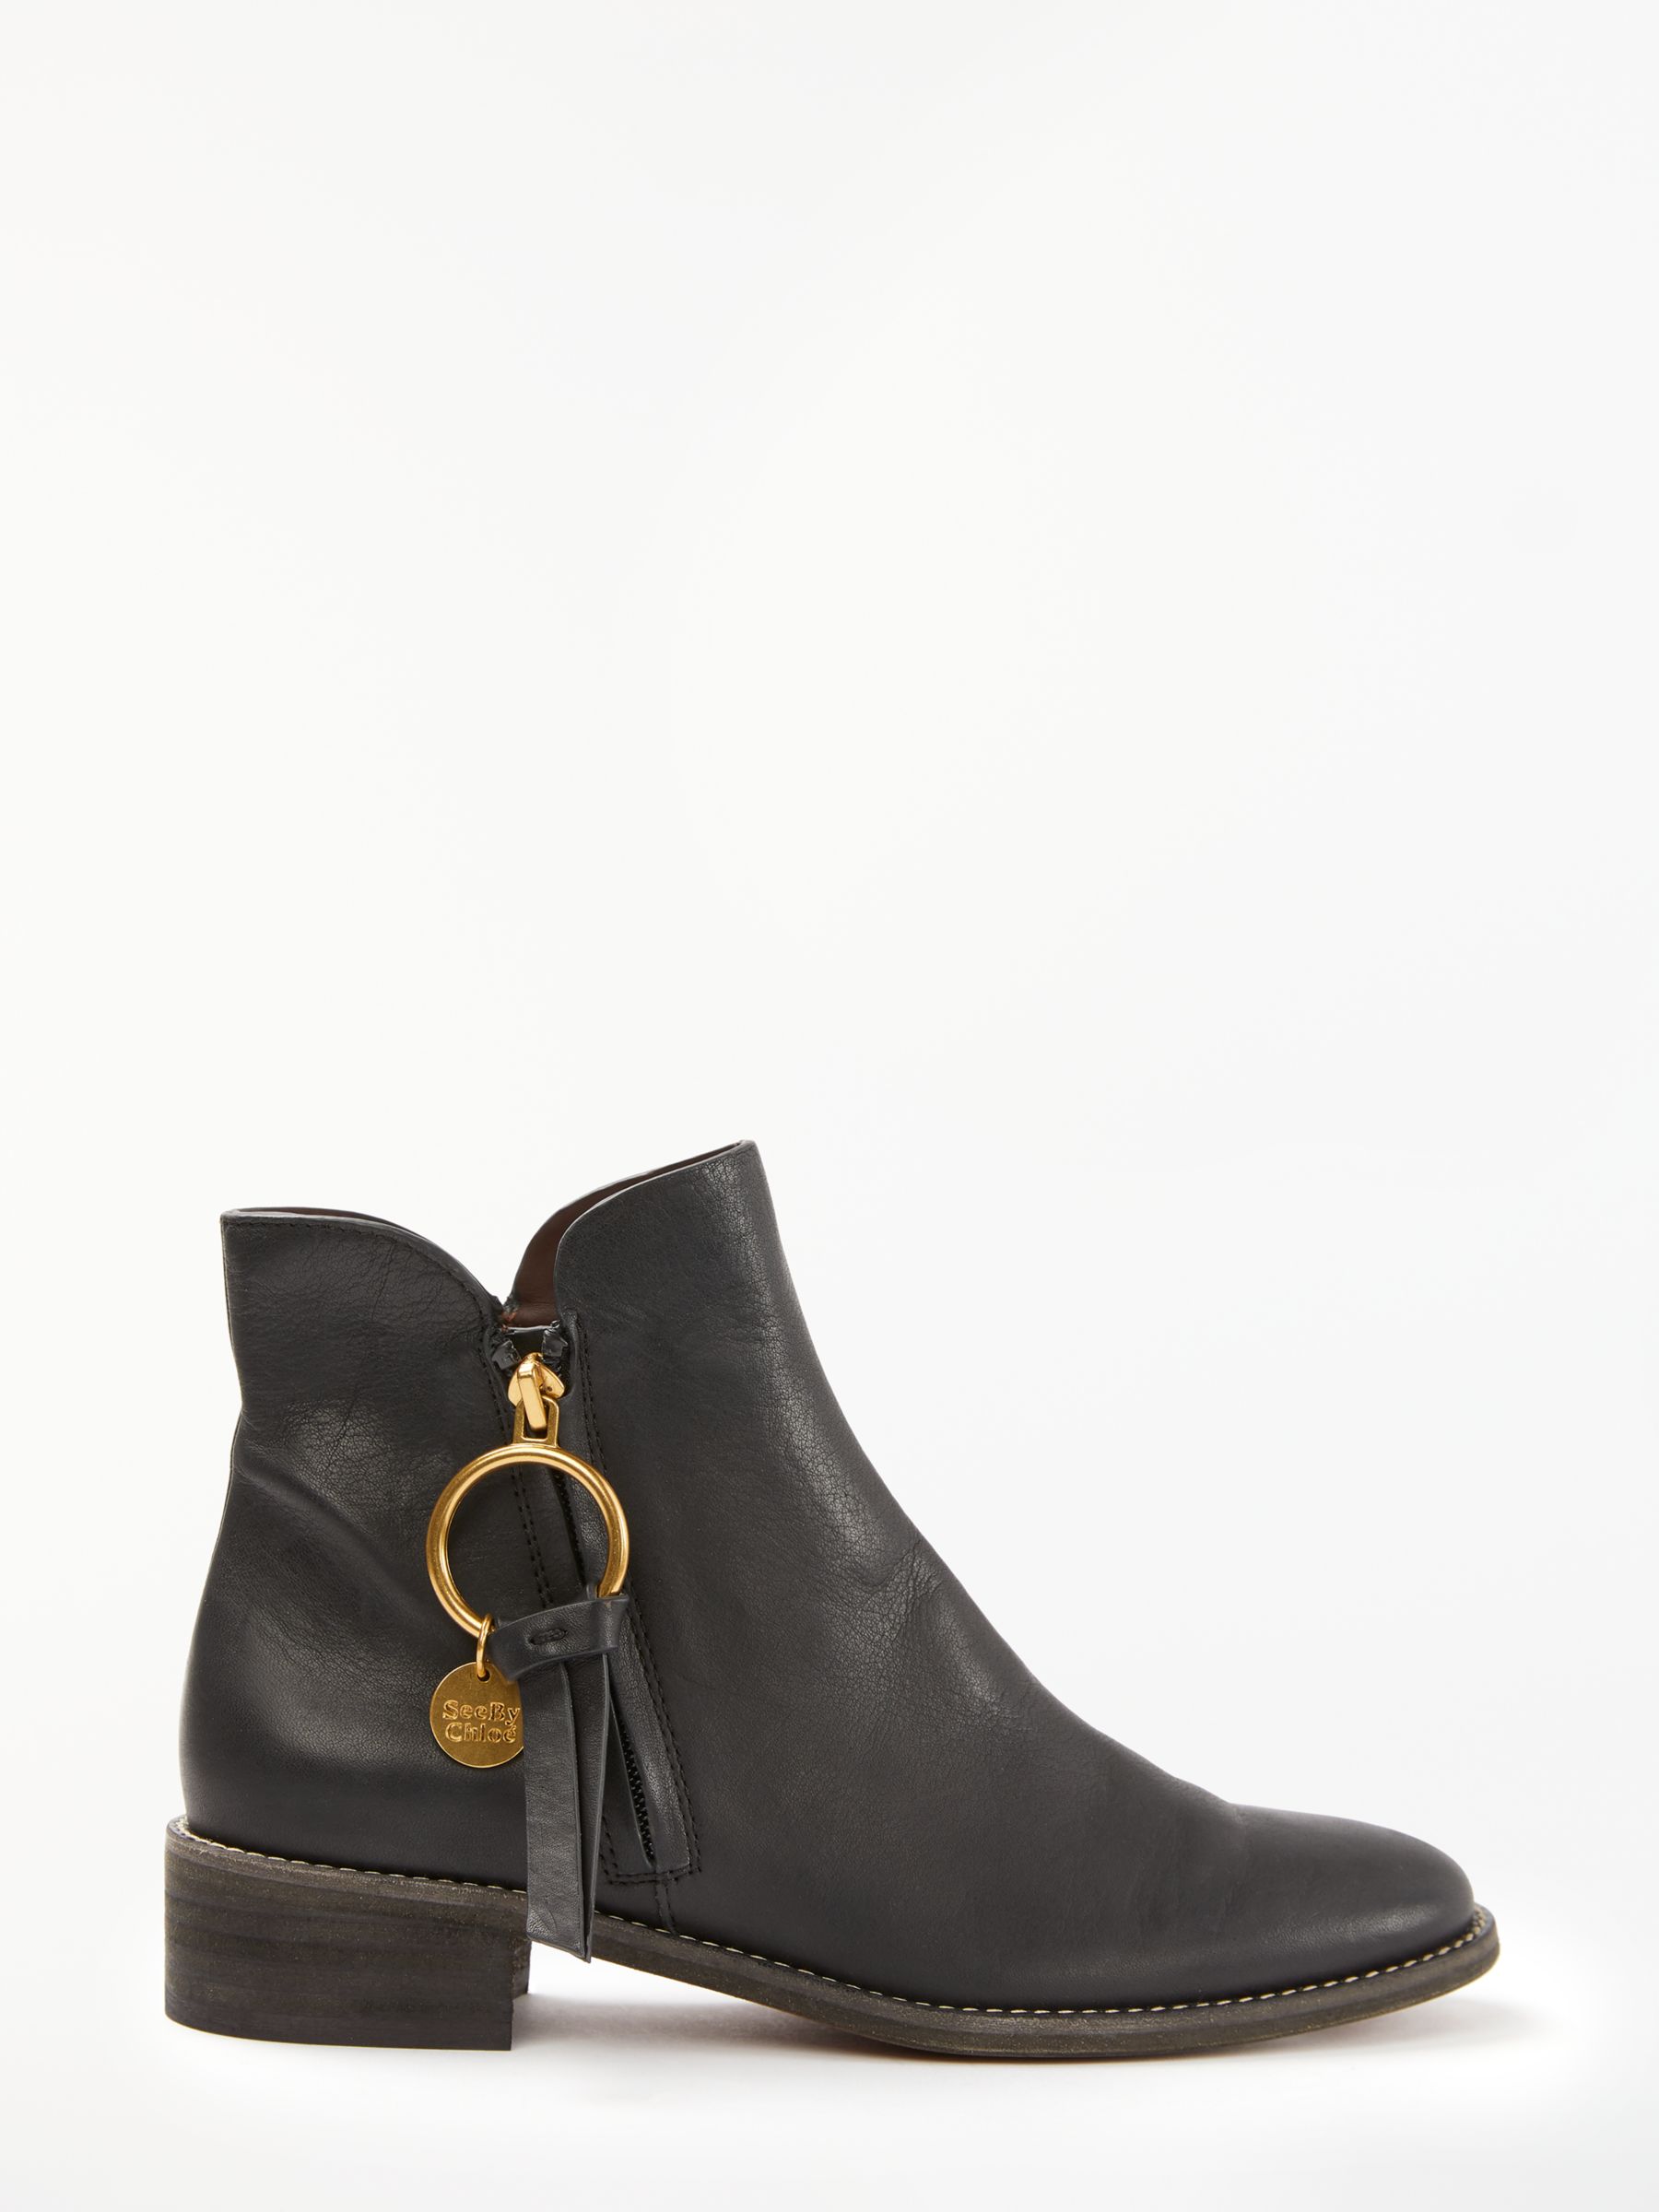 See By Chloé Low Heel Ankle Boots, Black Leather